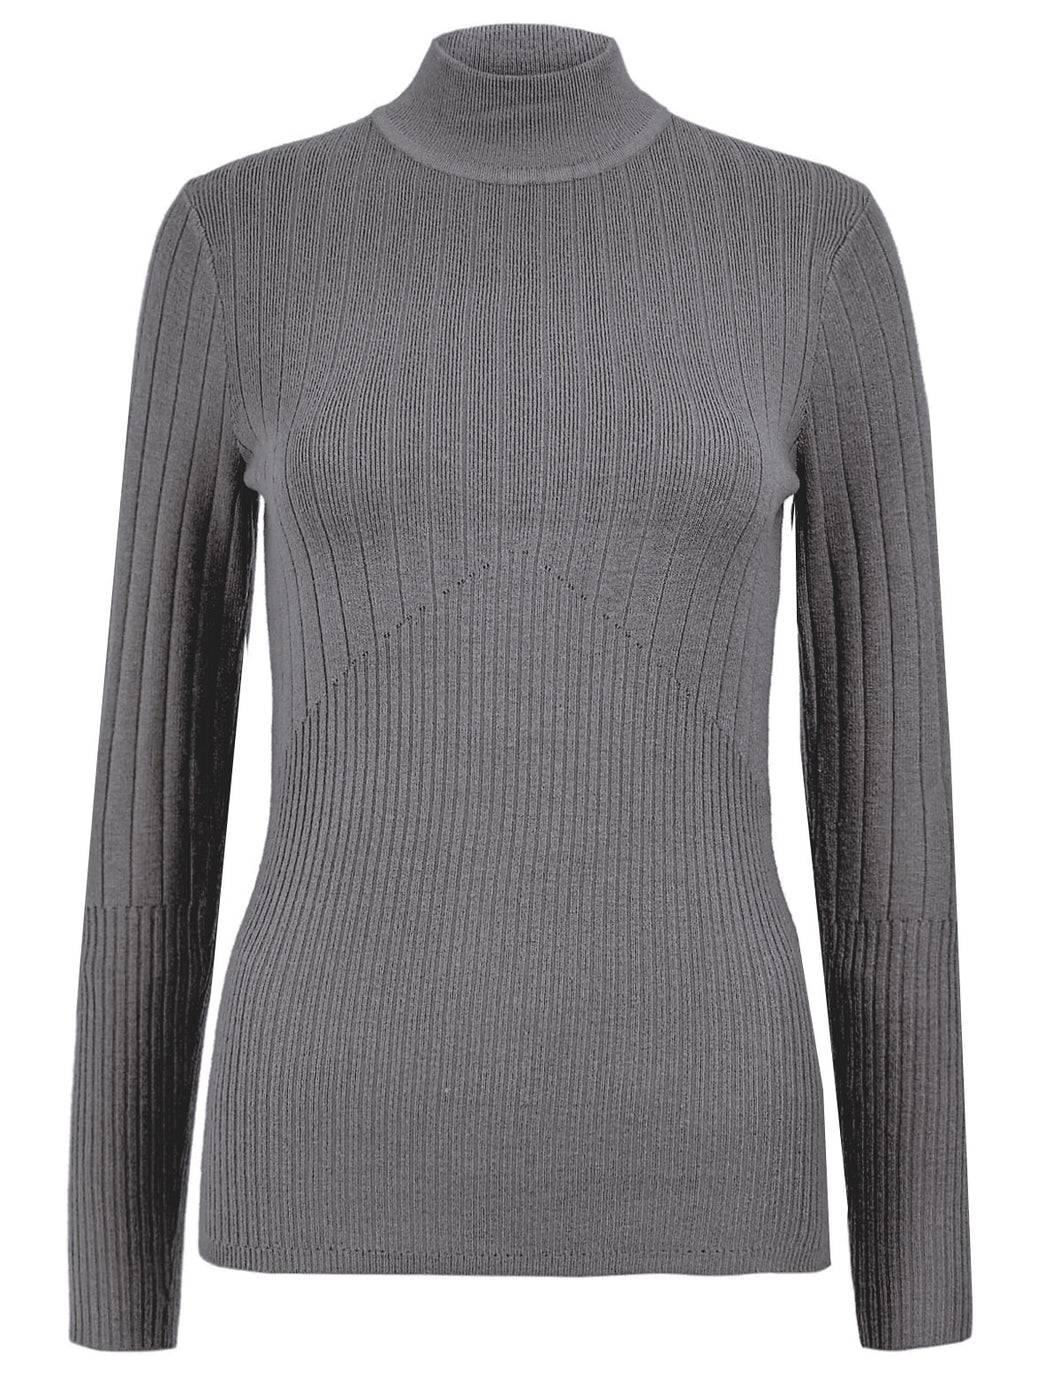 Ladies Grey High Neck Wide Ribbed Knitted Buttoned Sleeve Jumper